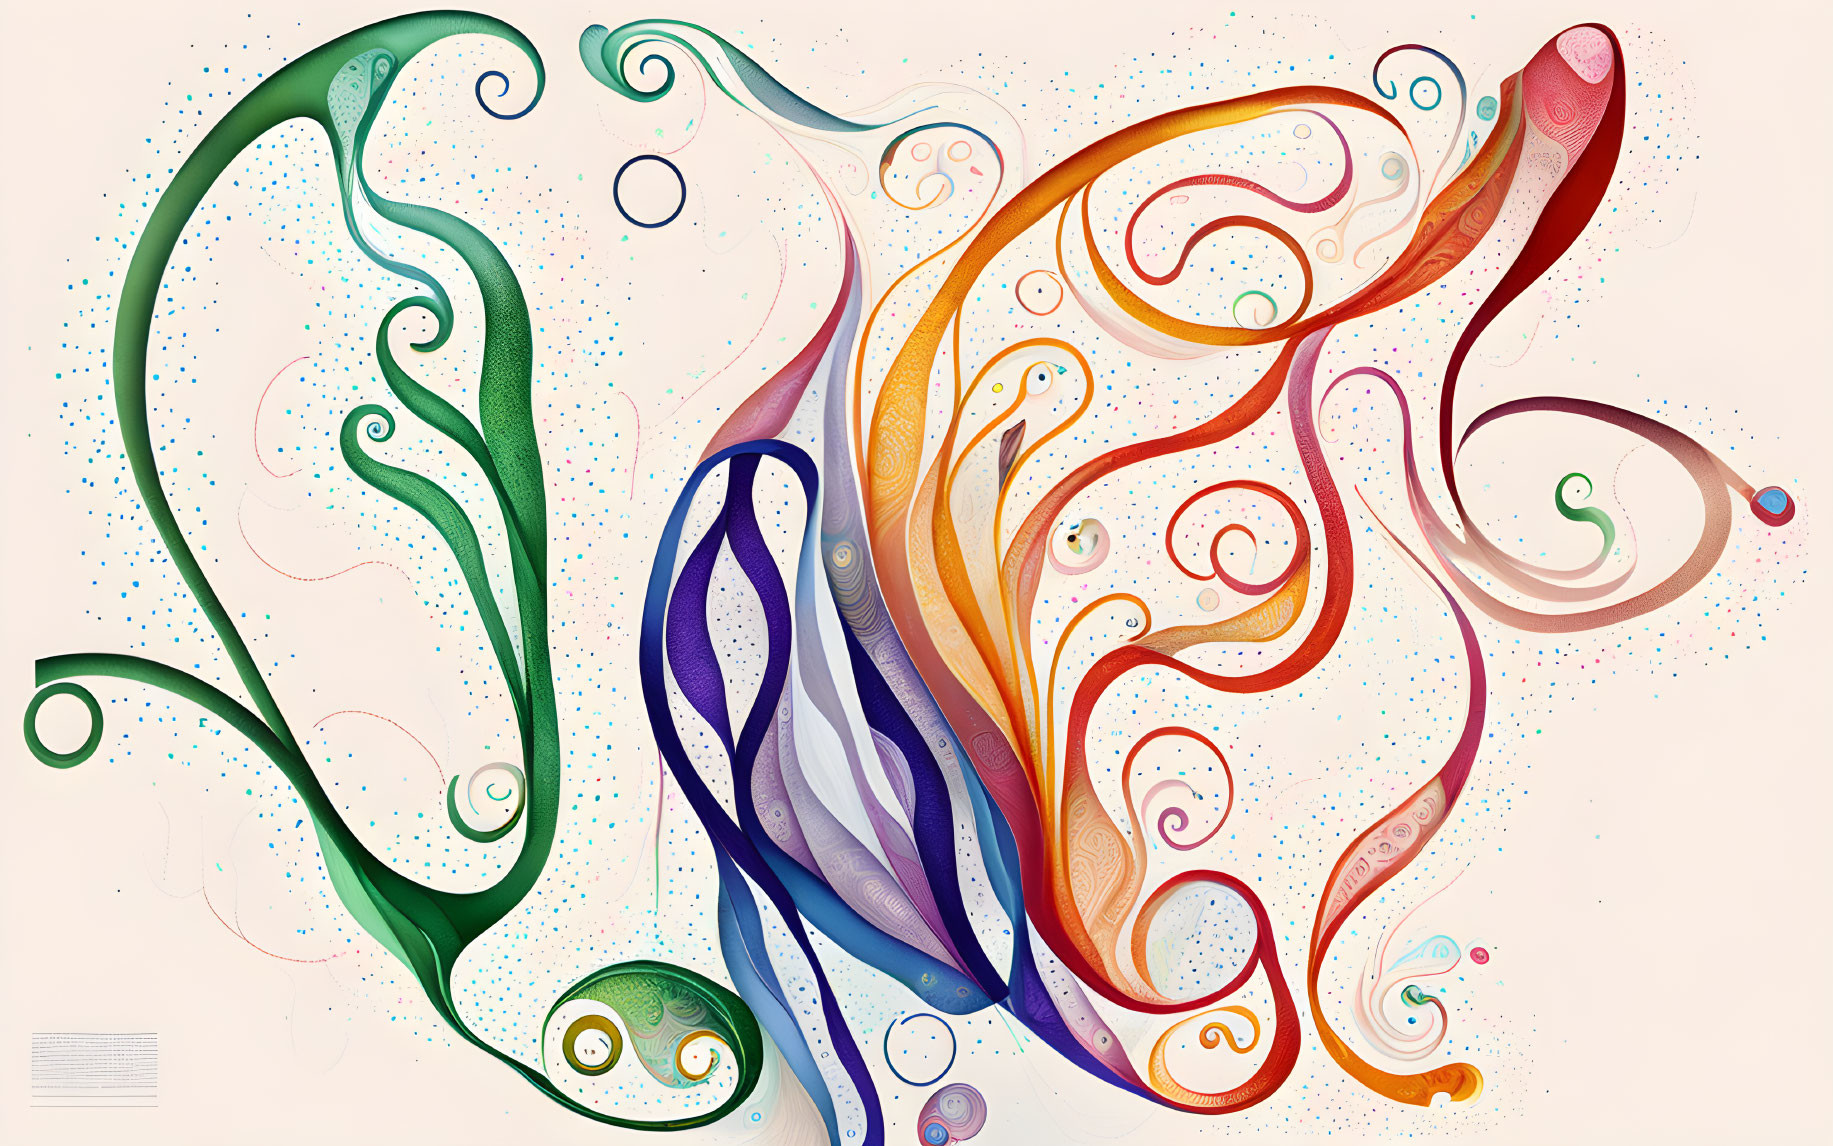 Vibrant abstract art: swirling green, orange, and purple hues with dotted accents